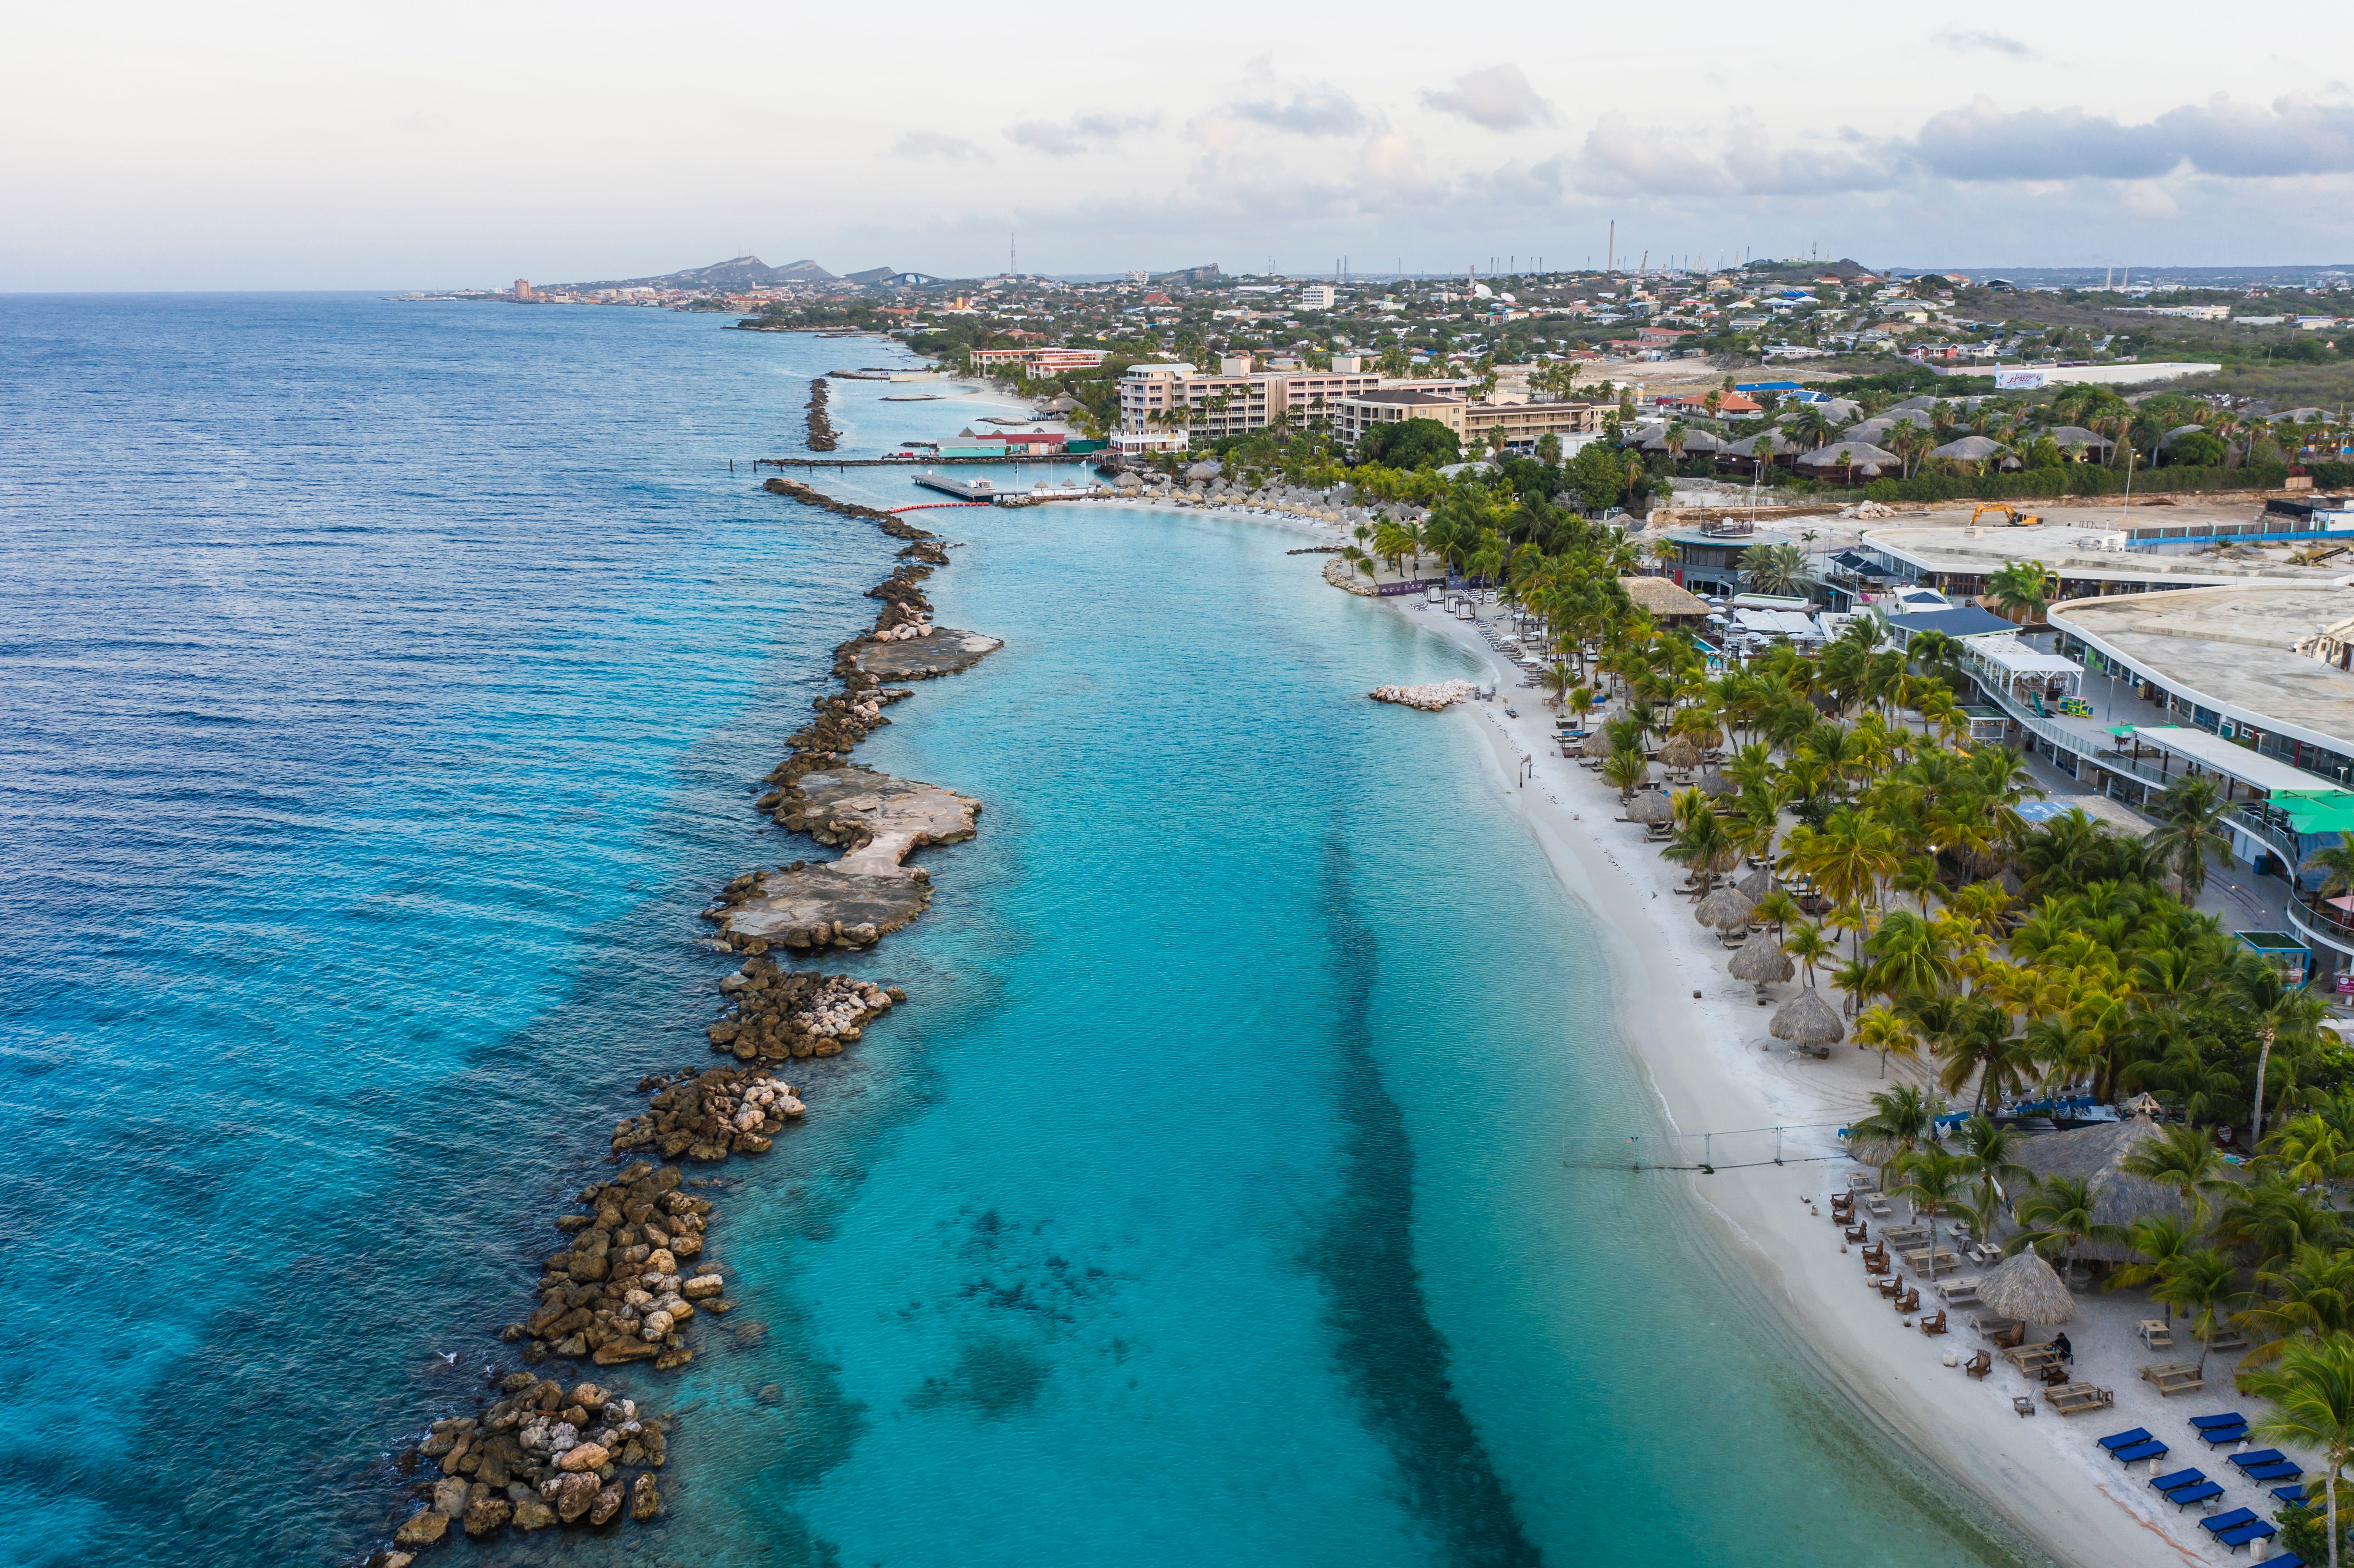 Aerial view of Mambo Beach near the cruise port in Curacao, featuring a turquoise sea, a rocky shoreline, and a series of beachfront properties and palm trees.